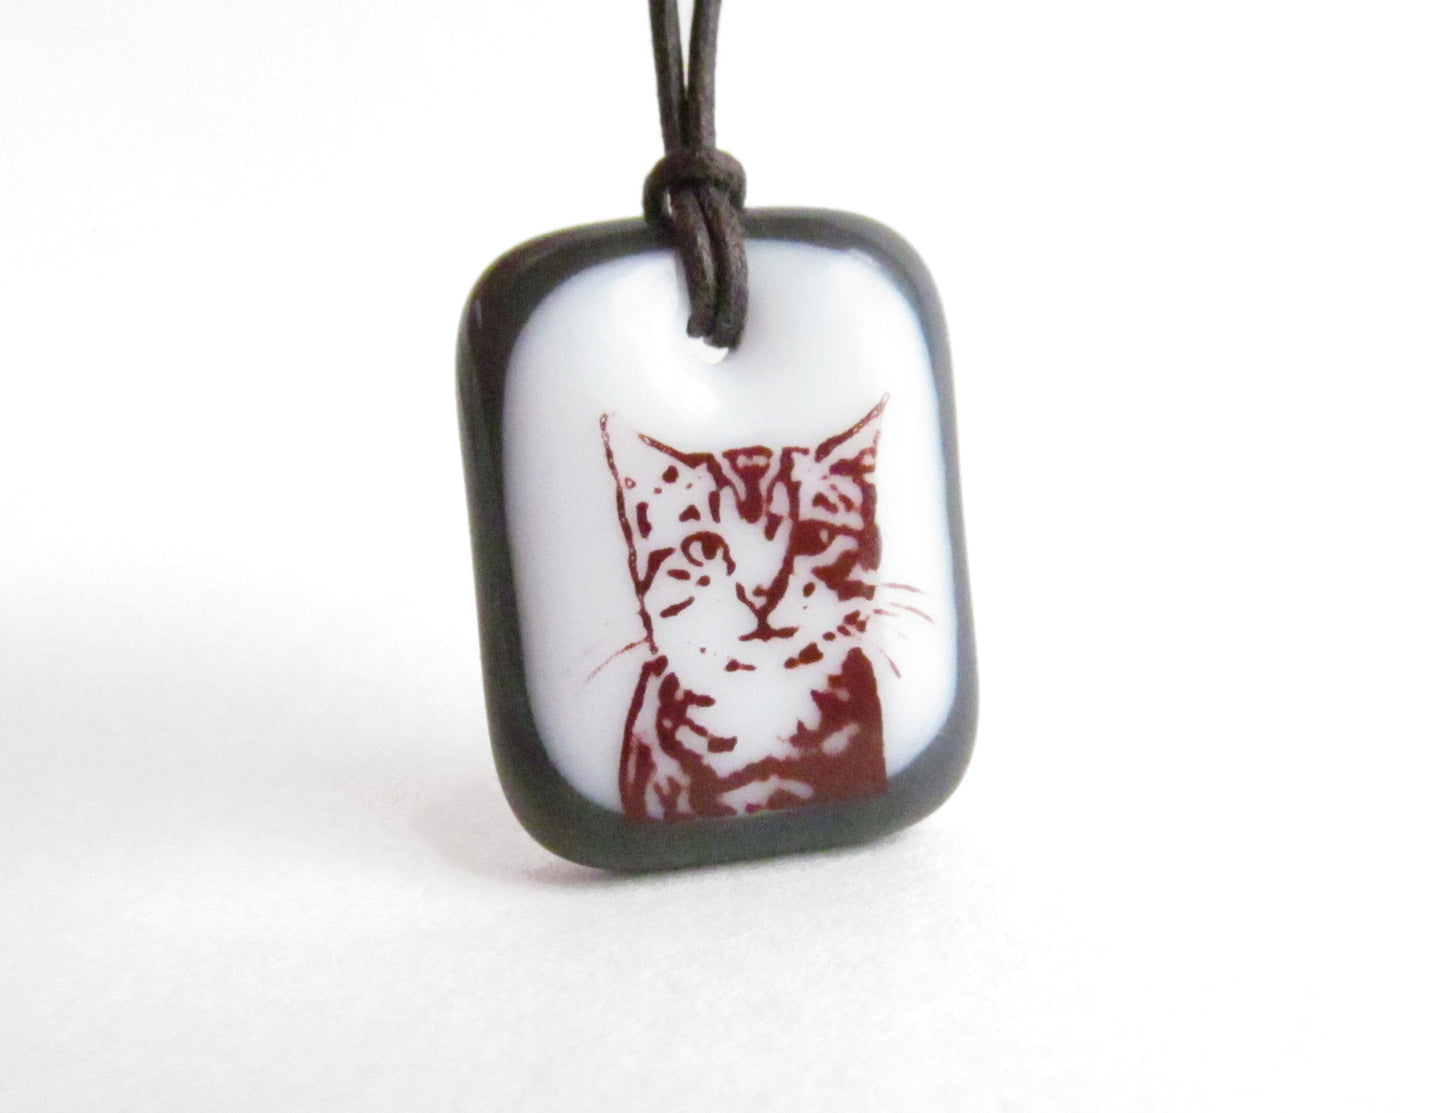 Grey and white tabby cat gift